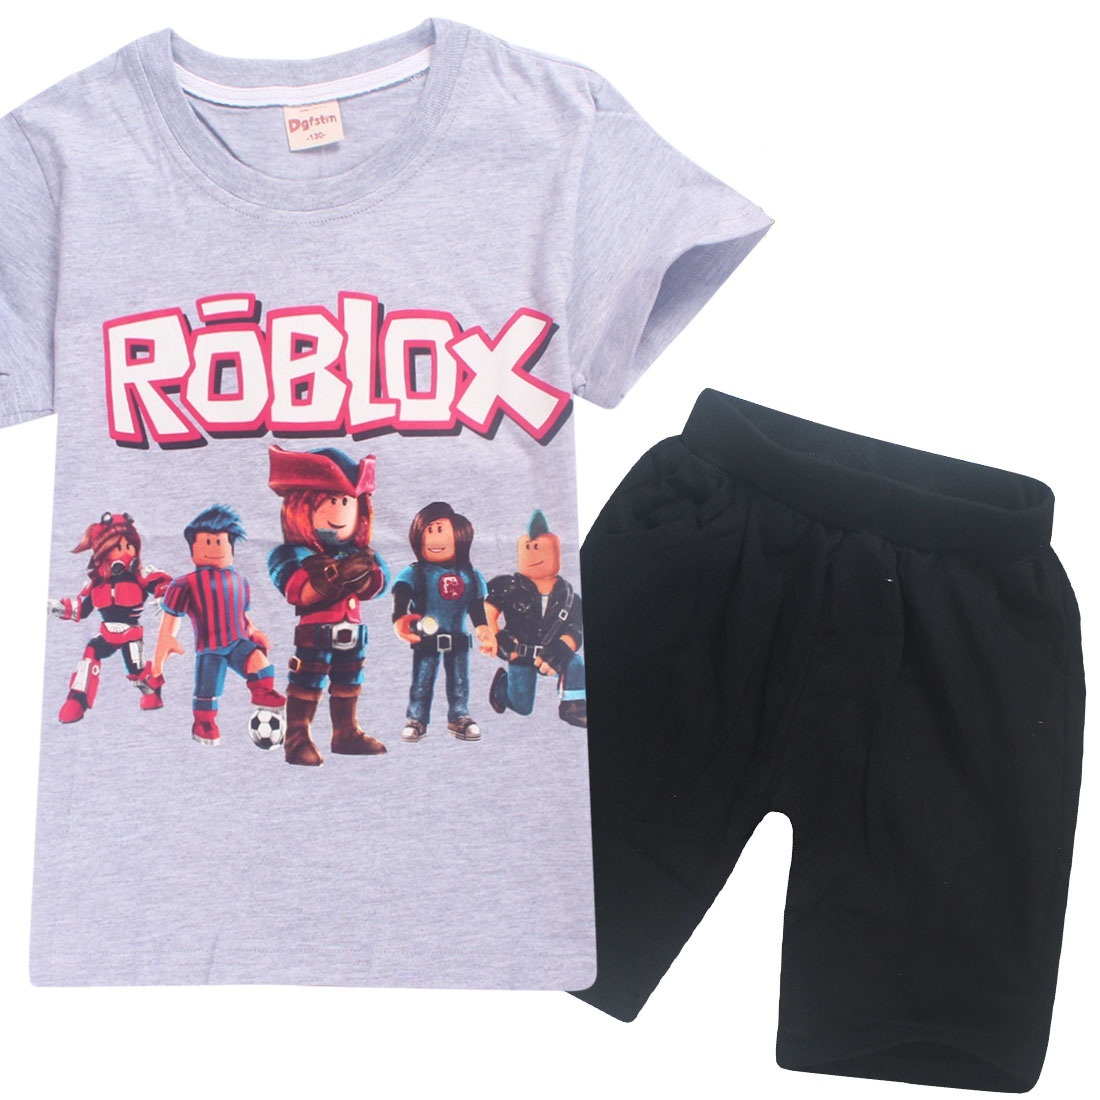 How Copy Roblox Shirts And Pants 2018